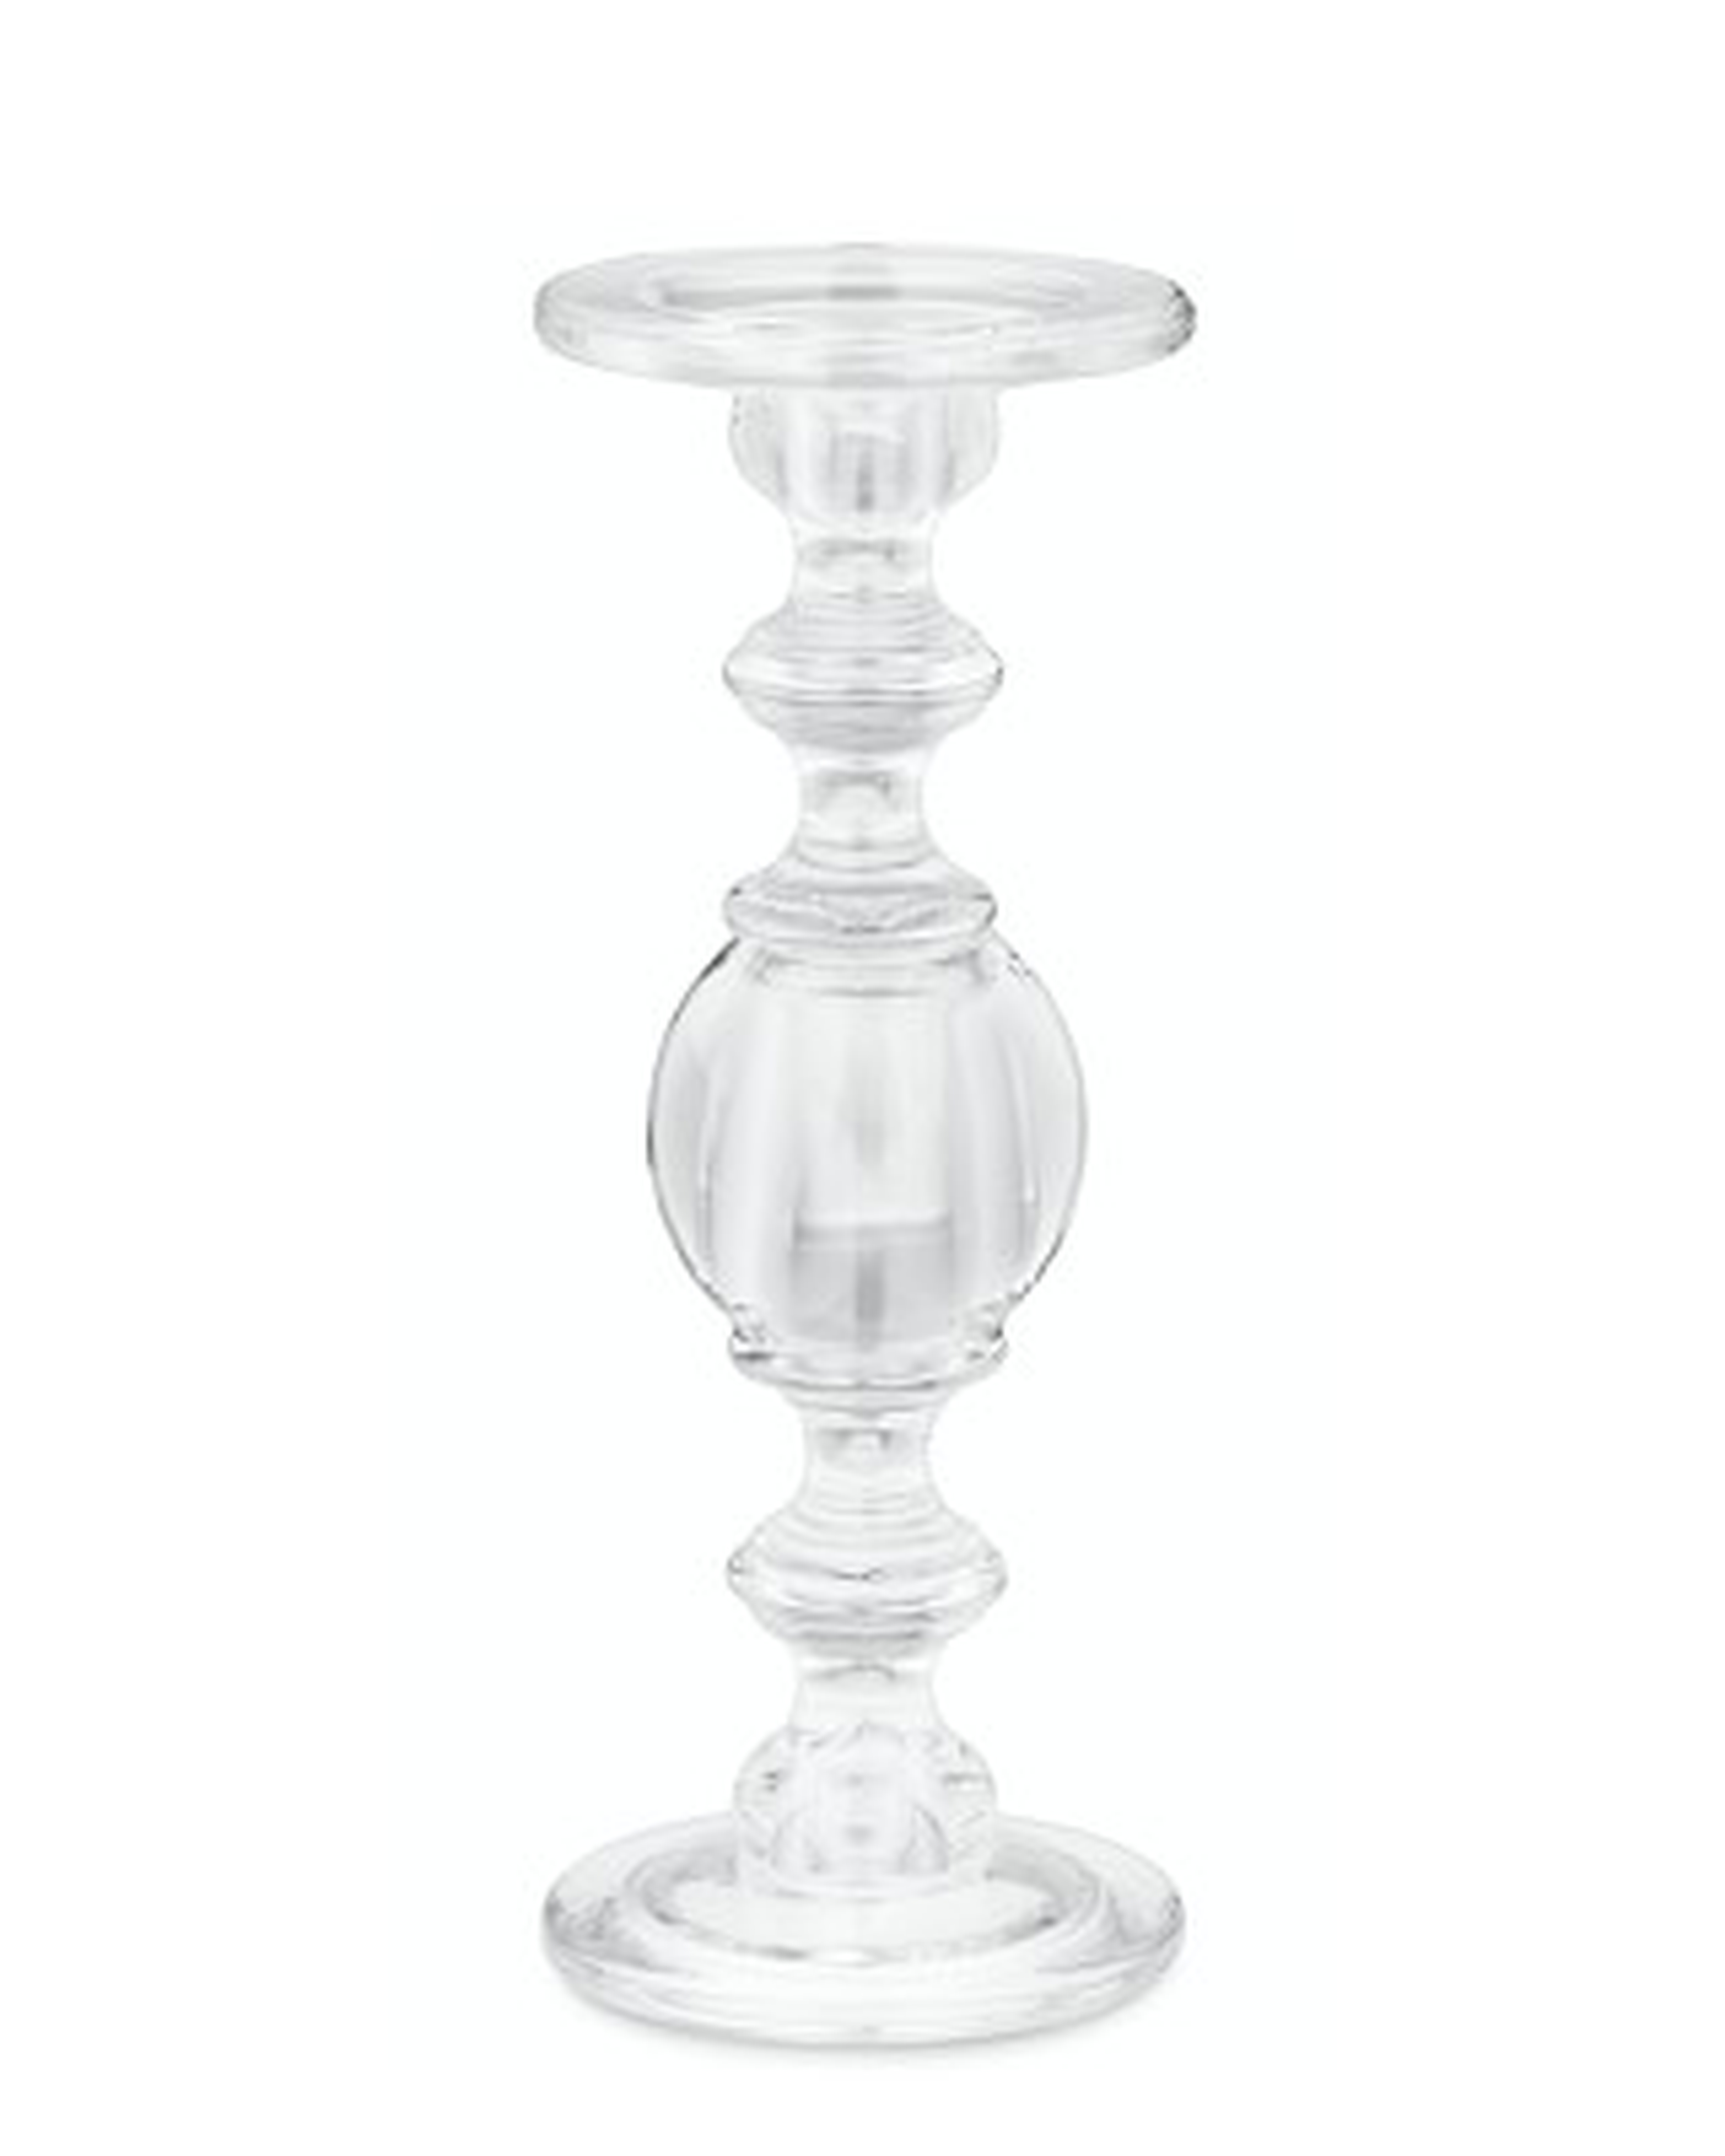 Classic Glass Candlestick Holder, Large - Williams Sonoma